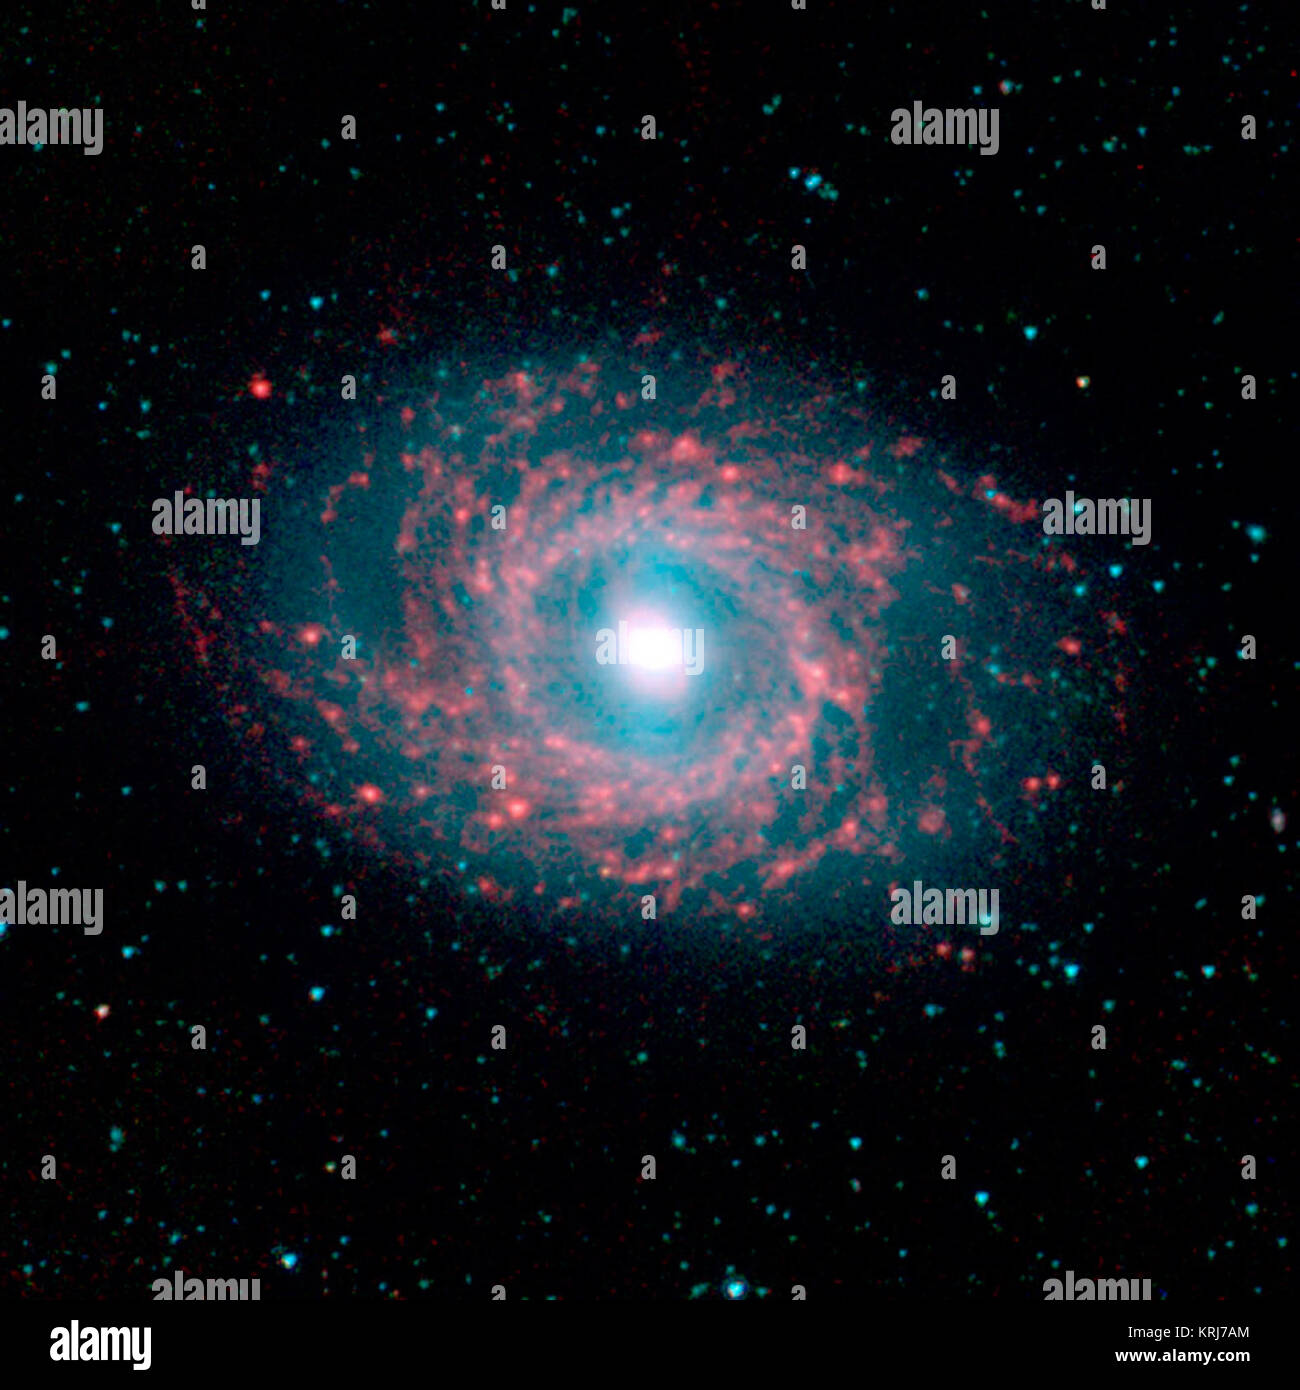 This image of galaxy NGC 3351, located approximately 30 million light-years away in the constellation Leo was captured by the Spitzer Infrared Nearby Galaxy Survey (SINGS) Legacy Project using the telescope's Infrared Array Camera (IRAC).  The remarkable galaxy is graced with beautiful 'rings' of star formation as seen at the longer (red) wavelengths, pierced by a massive bar-like stellar structure (blue light) that extends from the nucleus to the ringed disk.  The SINGS image is a four-channel false-color composite, where blue indicates emission at 3.6 microns, green corresponds to 4.5 micron Stock Photo